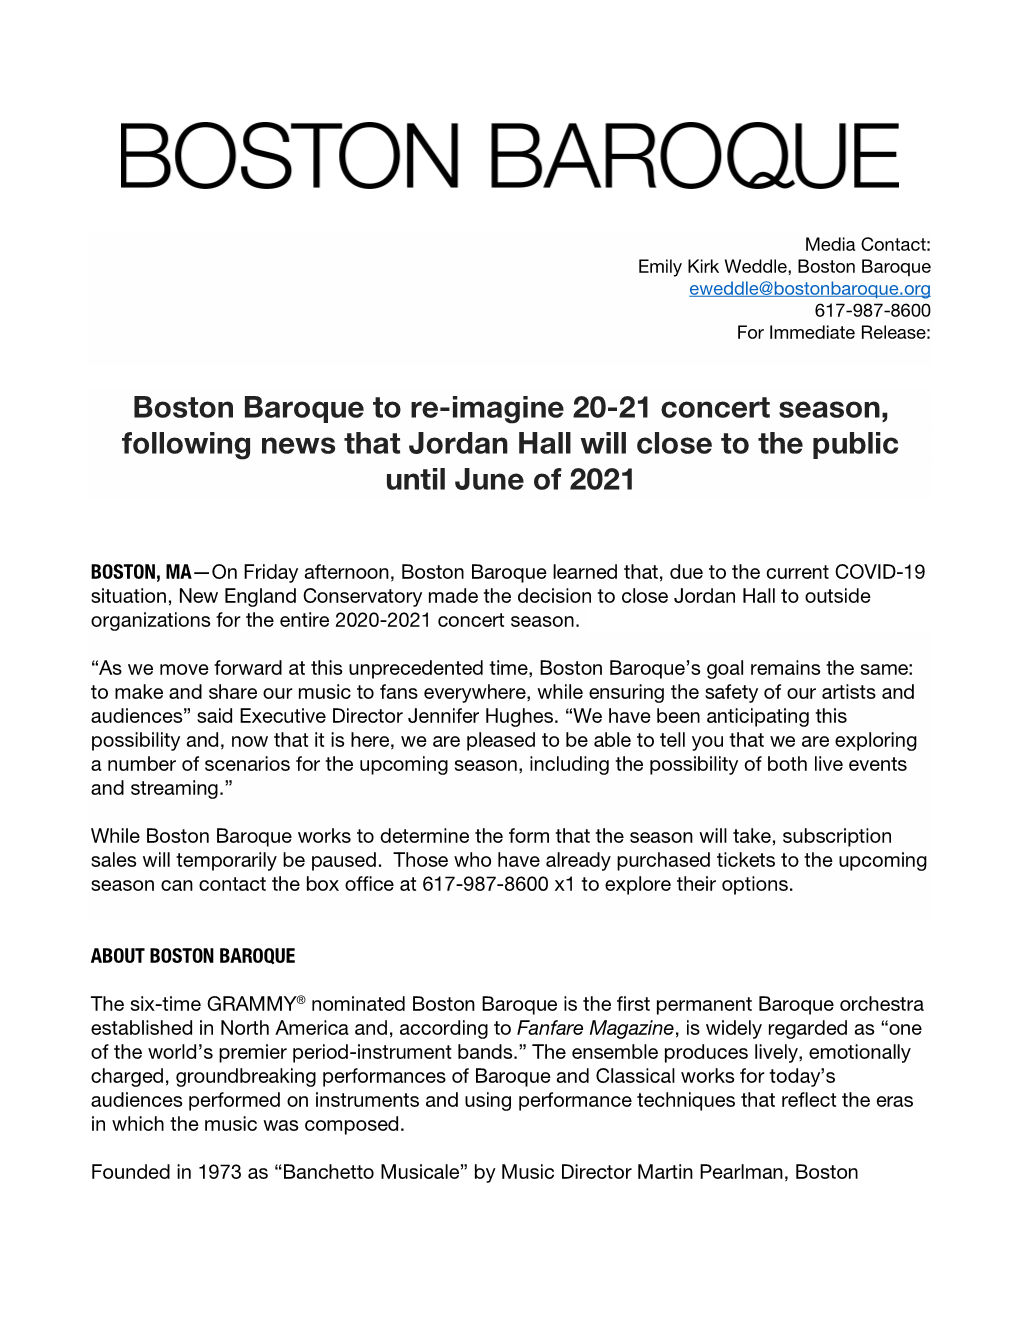 Boston Baroque to Re-Imagine 20-21 Concert Season, Following News That Jordan Hall Will Close to the Public Until June of 2021